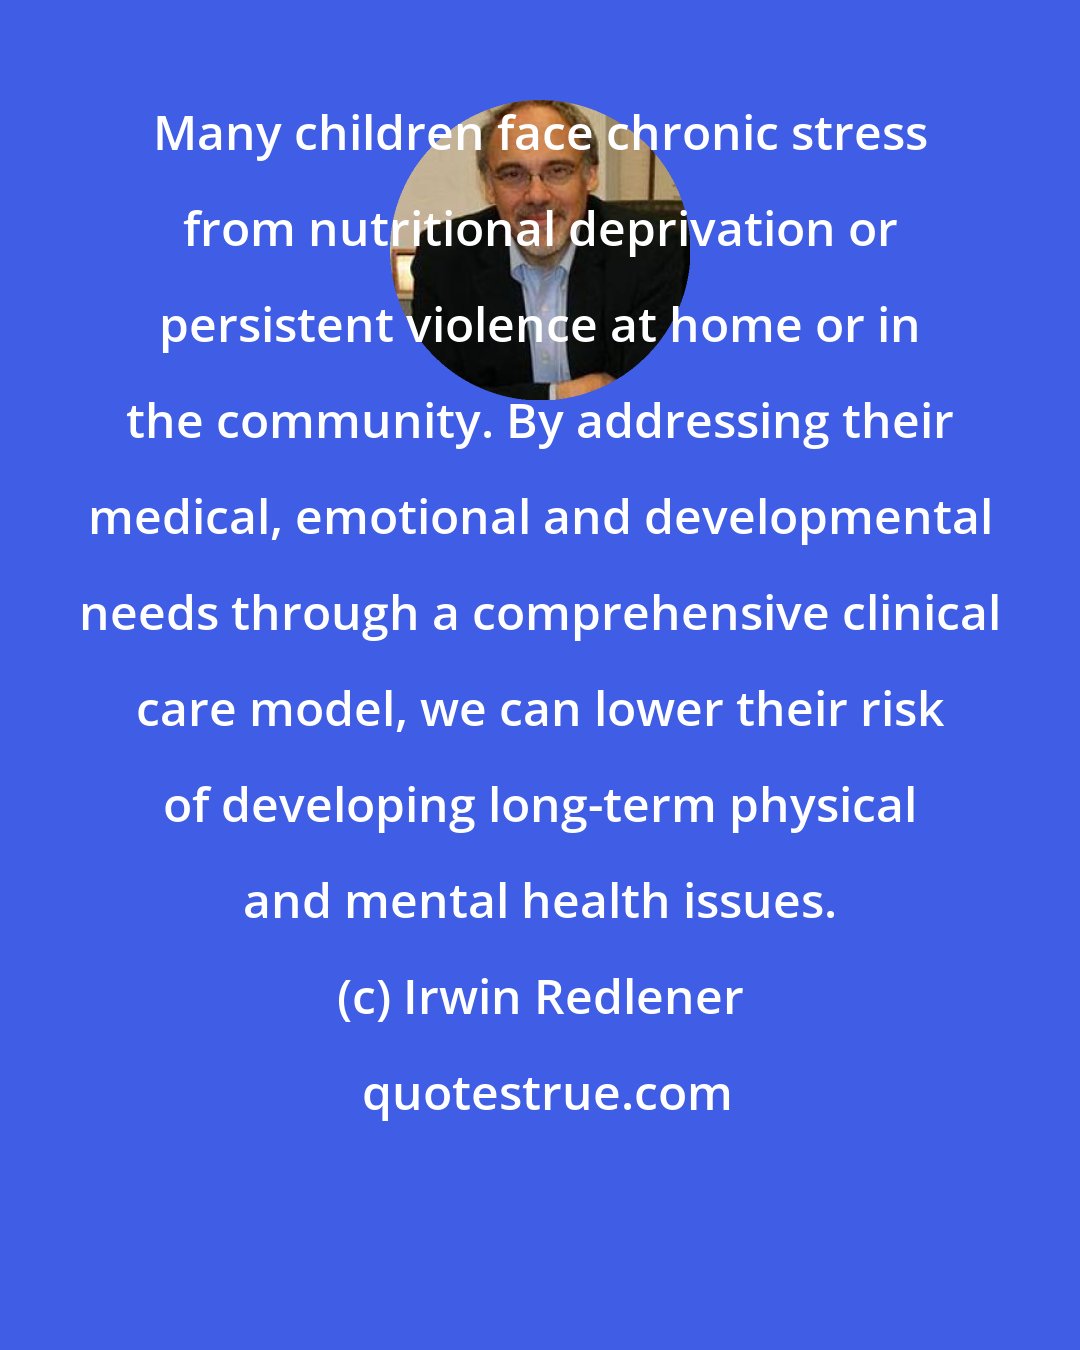 Irwin Redlener: Many children face chronic stress from nutritional deprivation or persistent violence at home or in the community. By addressing their medical, emotional and developmental needs through a comprehensive clinical care model, we can lower their risk of developing long-term physical and mental health issues.